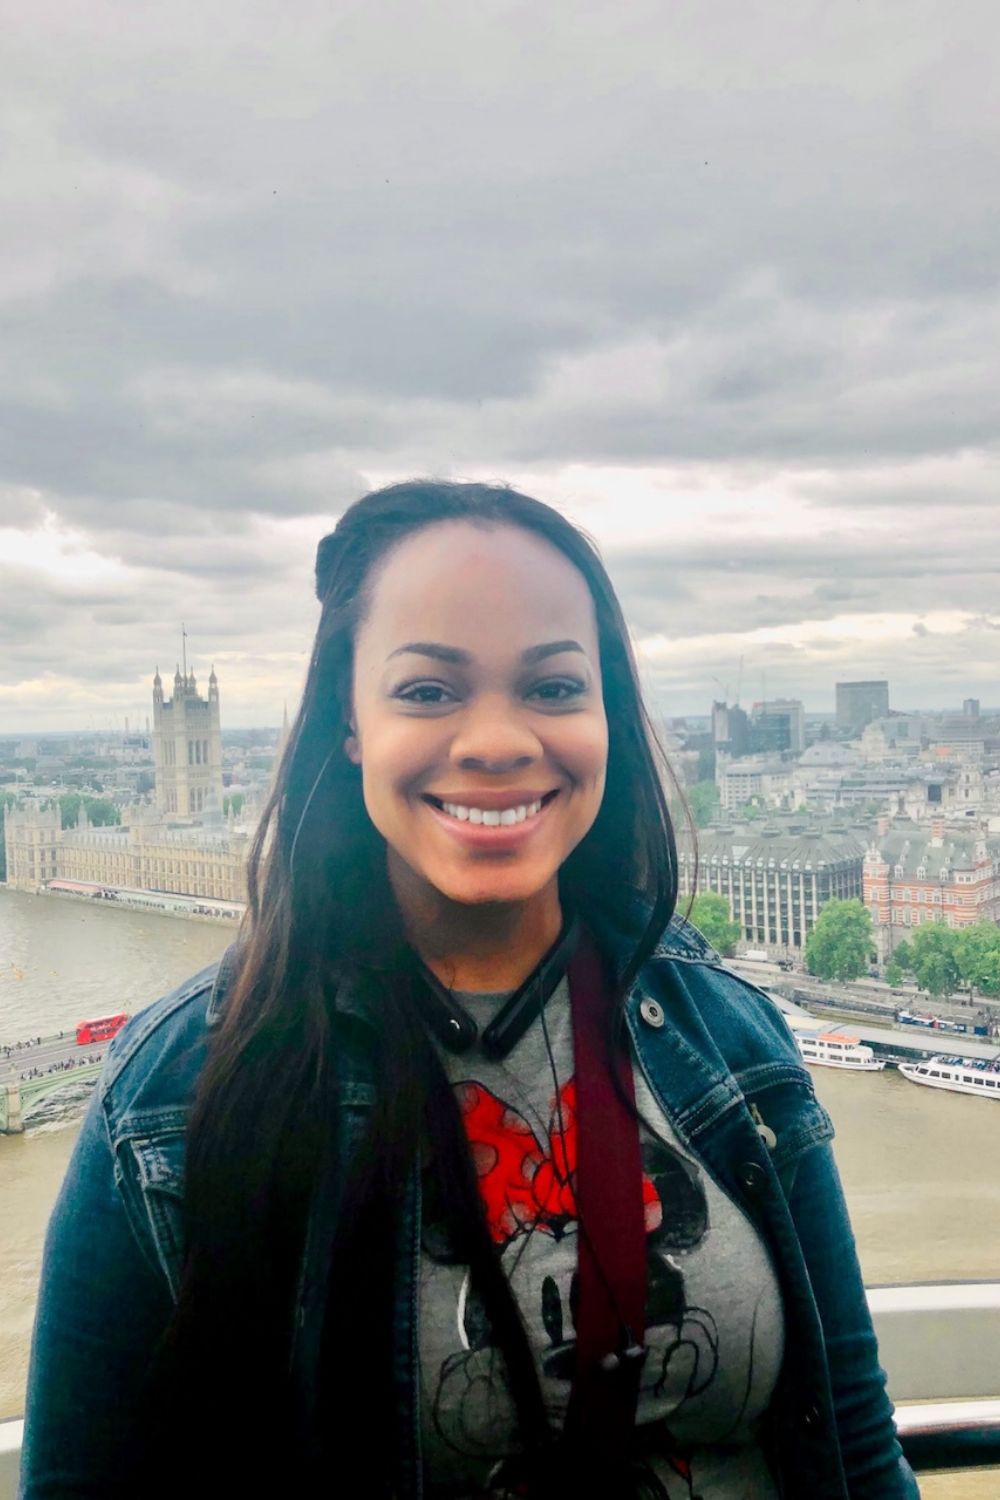 A woman smiles with the iconic Big Ben and the River Thames in the background, enjoying her career break in London, UK. She wears a denim jacket and a Minnie Mouse shirt, exuding happiness and relaxation amidst the city's historic landmarks.